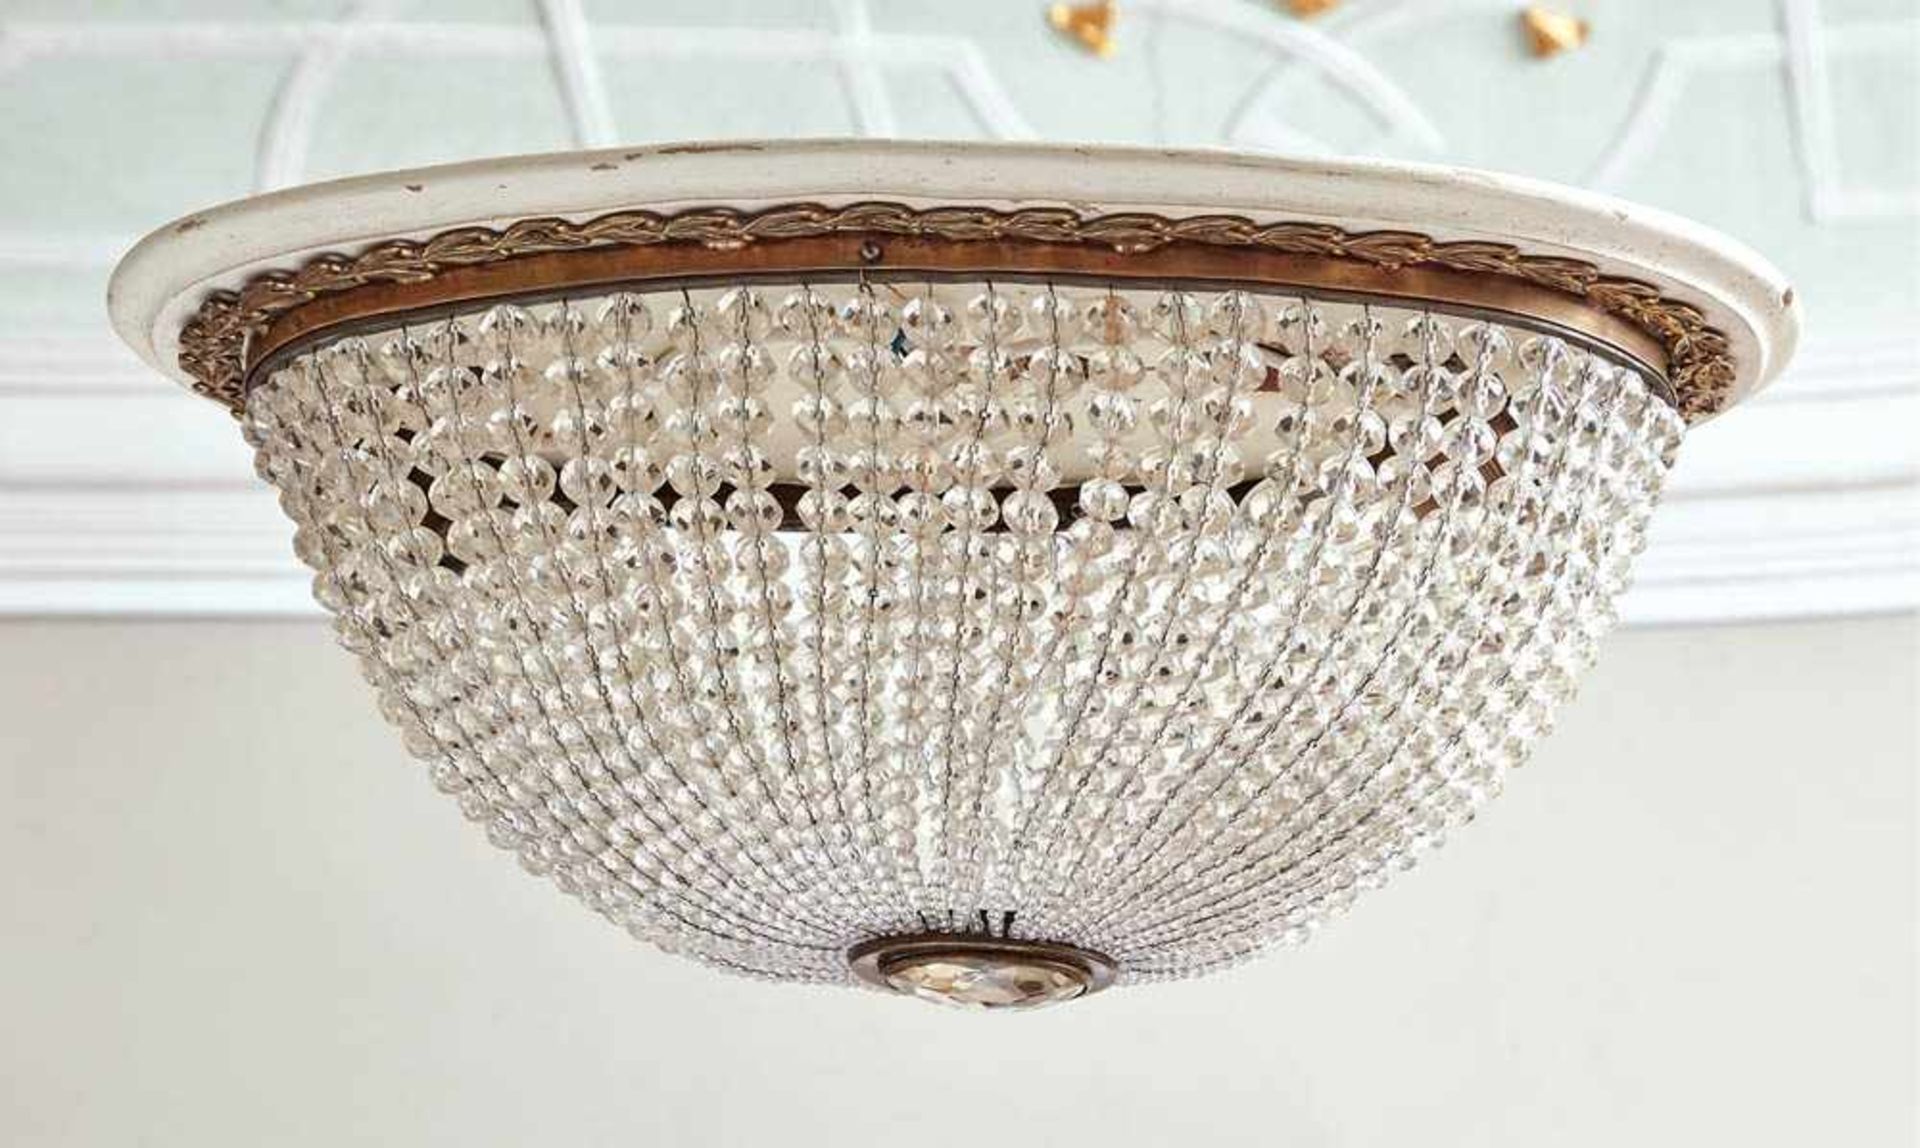 ChandelierProbably Bohemia, 19th c.Oval panel with leaf frieze all around, dense cords with cut